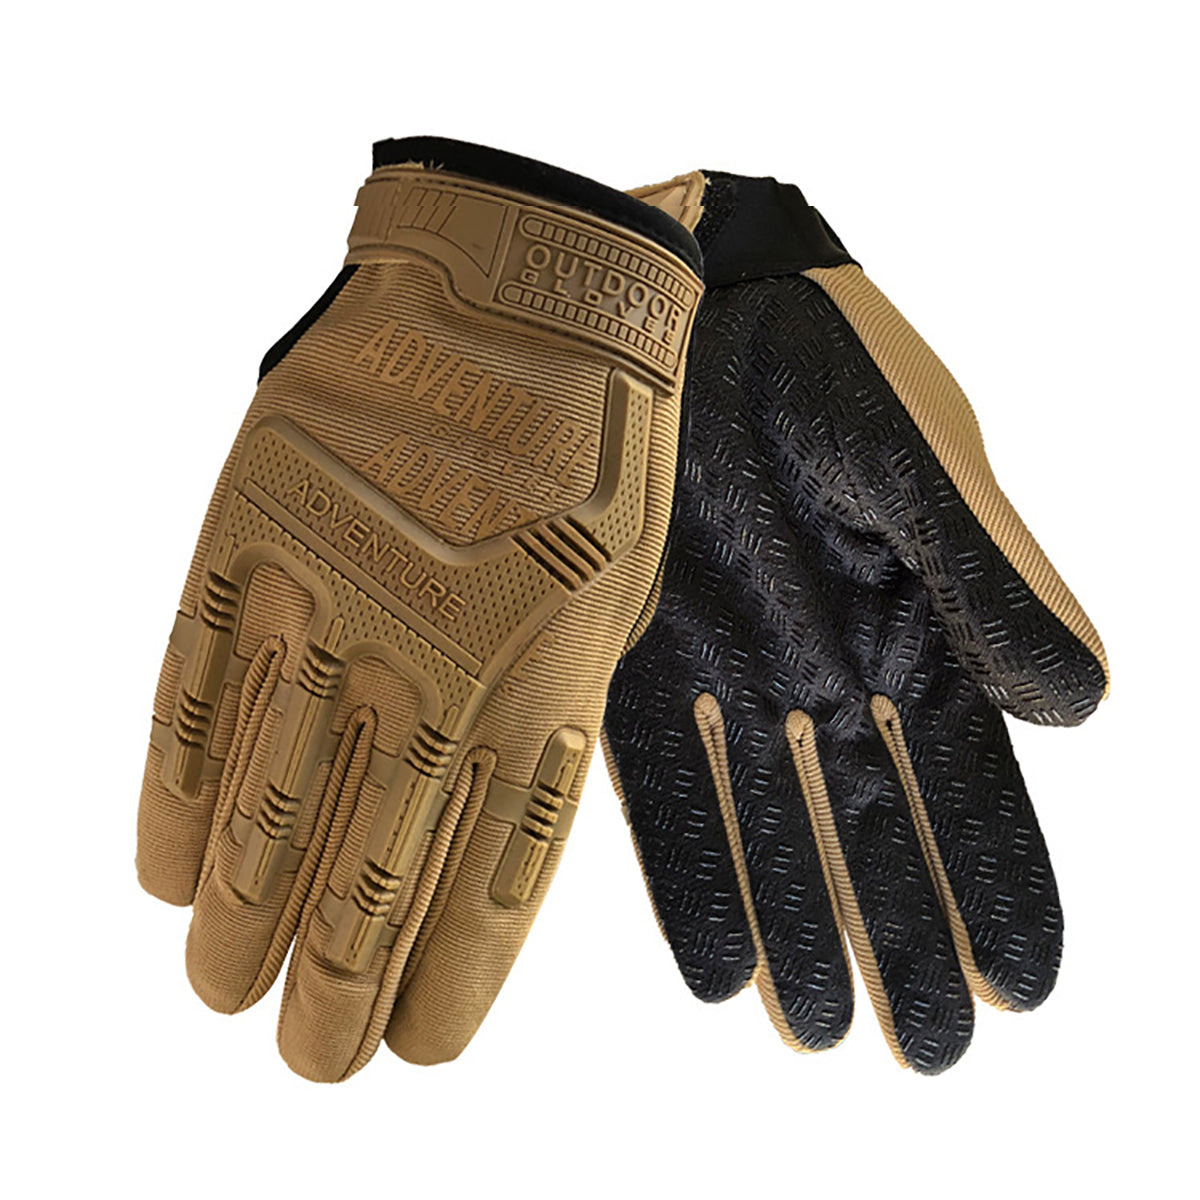 Sienna Motorcycle Full Finger Tactical Gloves Military Army Outdoor Hunting Cycling Sports